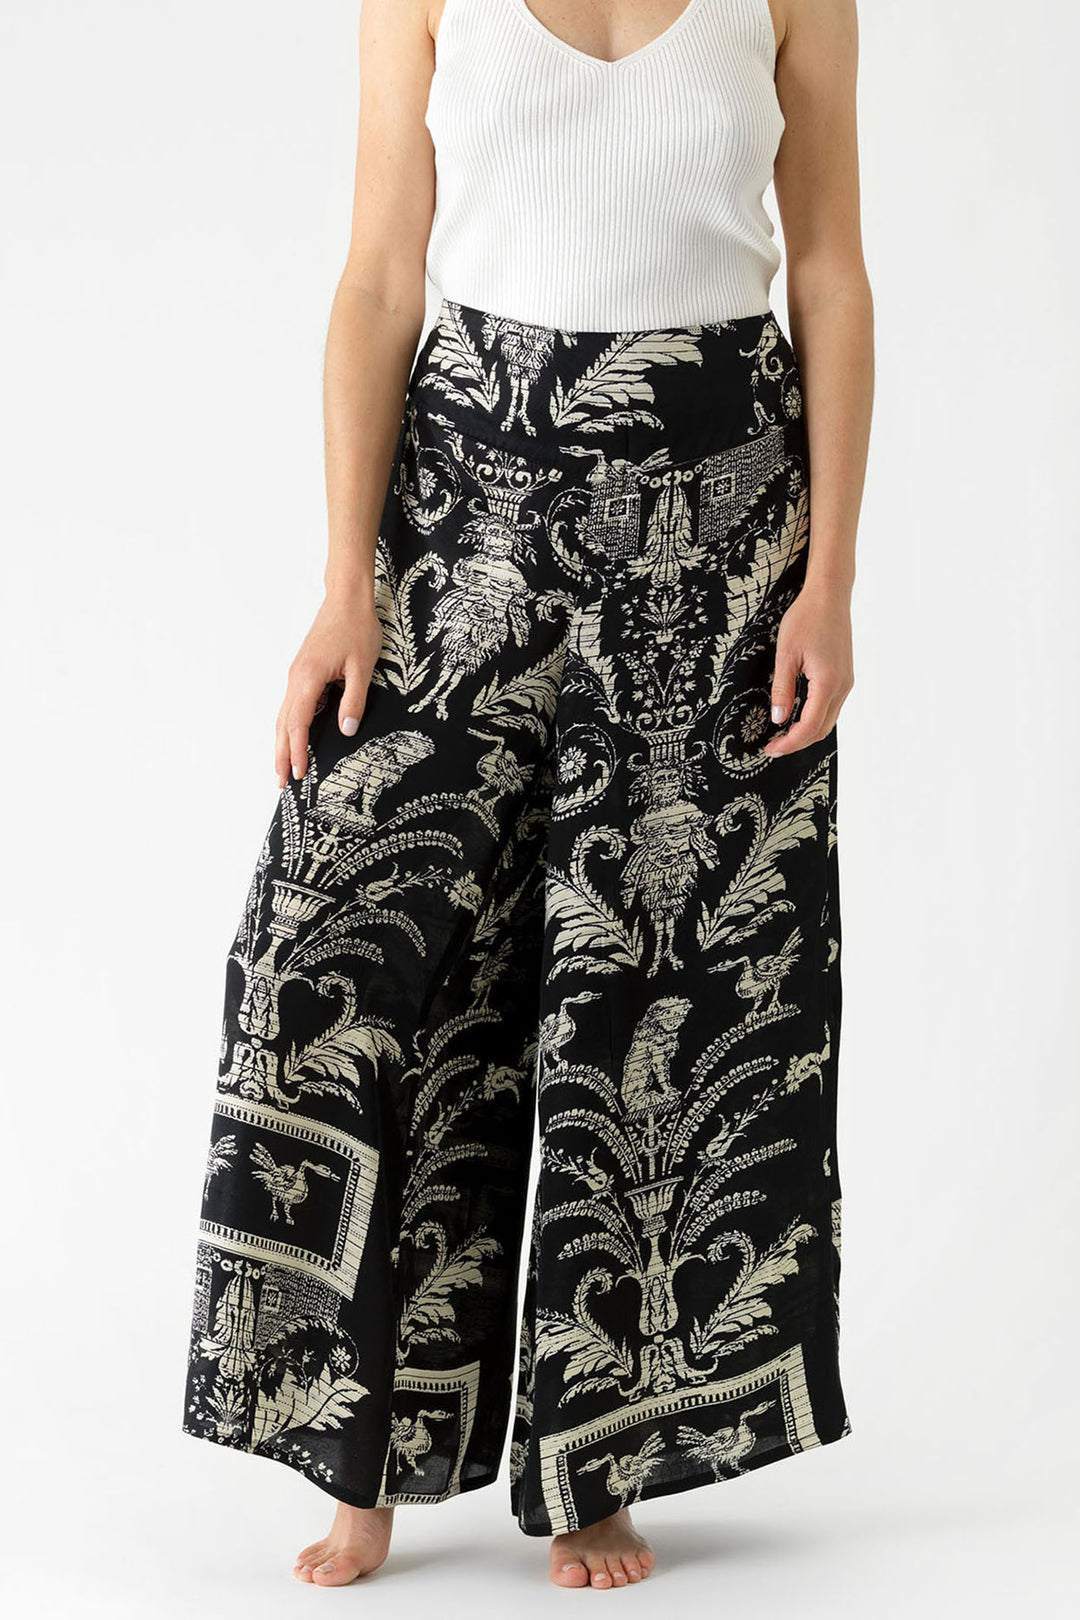 One Hundred Stars PPADAMBLK Black Vintage Damask Palazzo Pant Trousers - Dotique Chesterfield